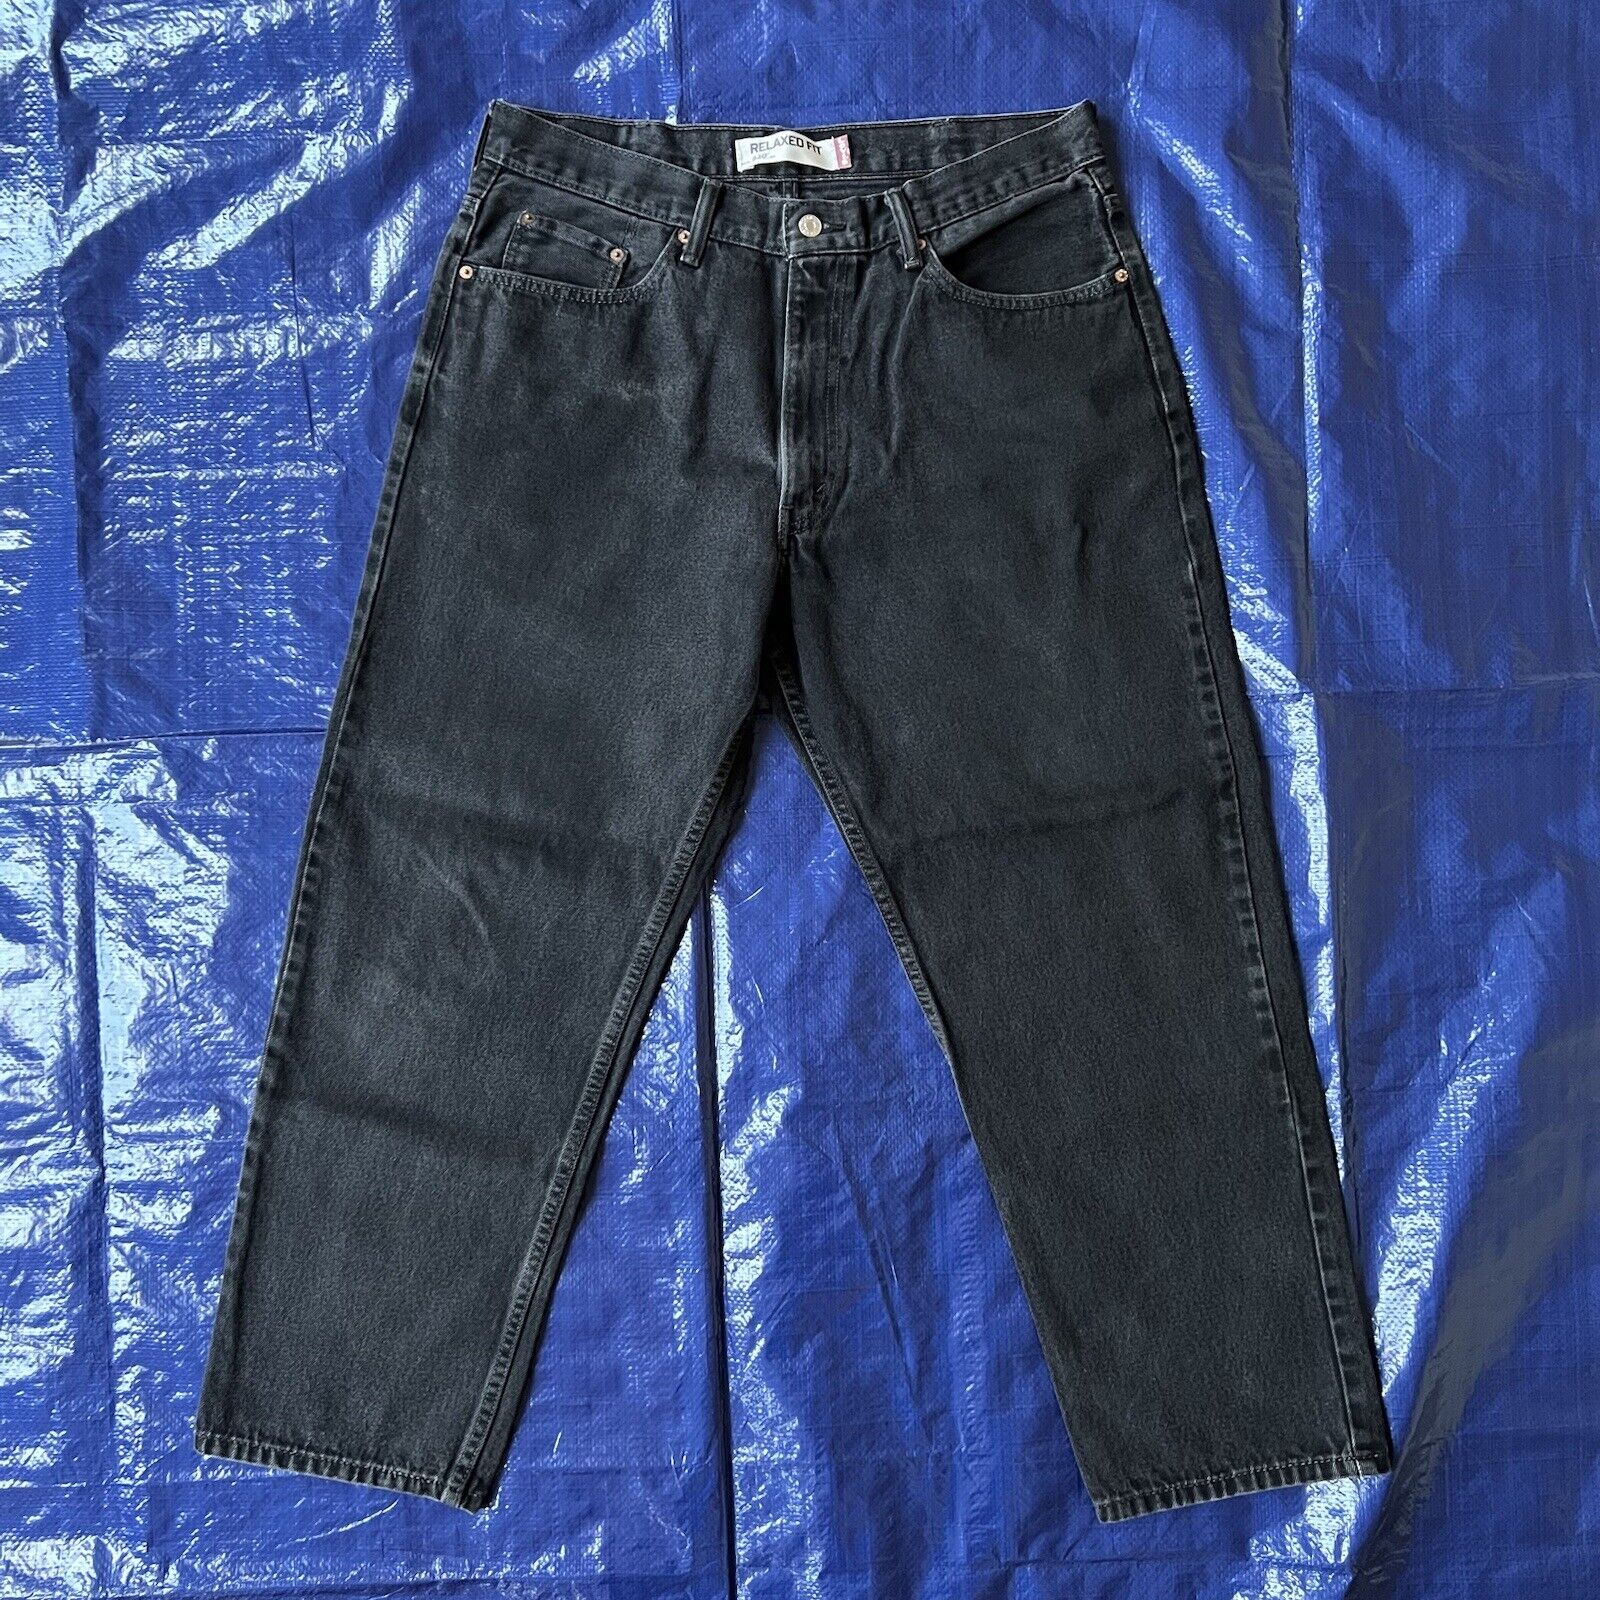 levis 550 relaxed fit - image 4